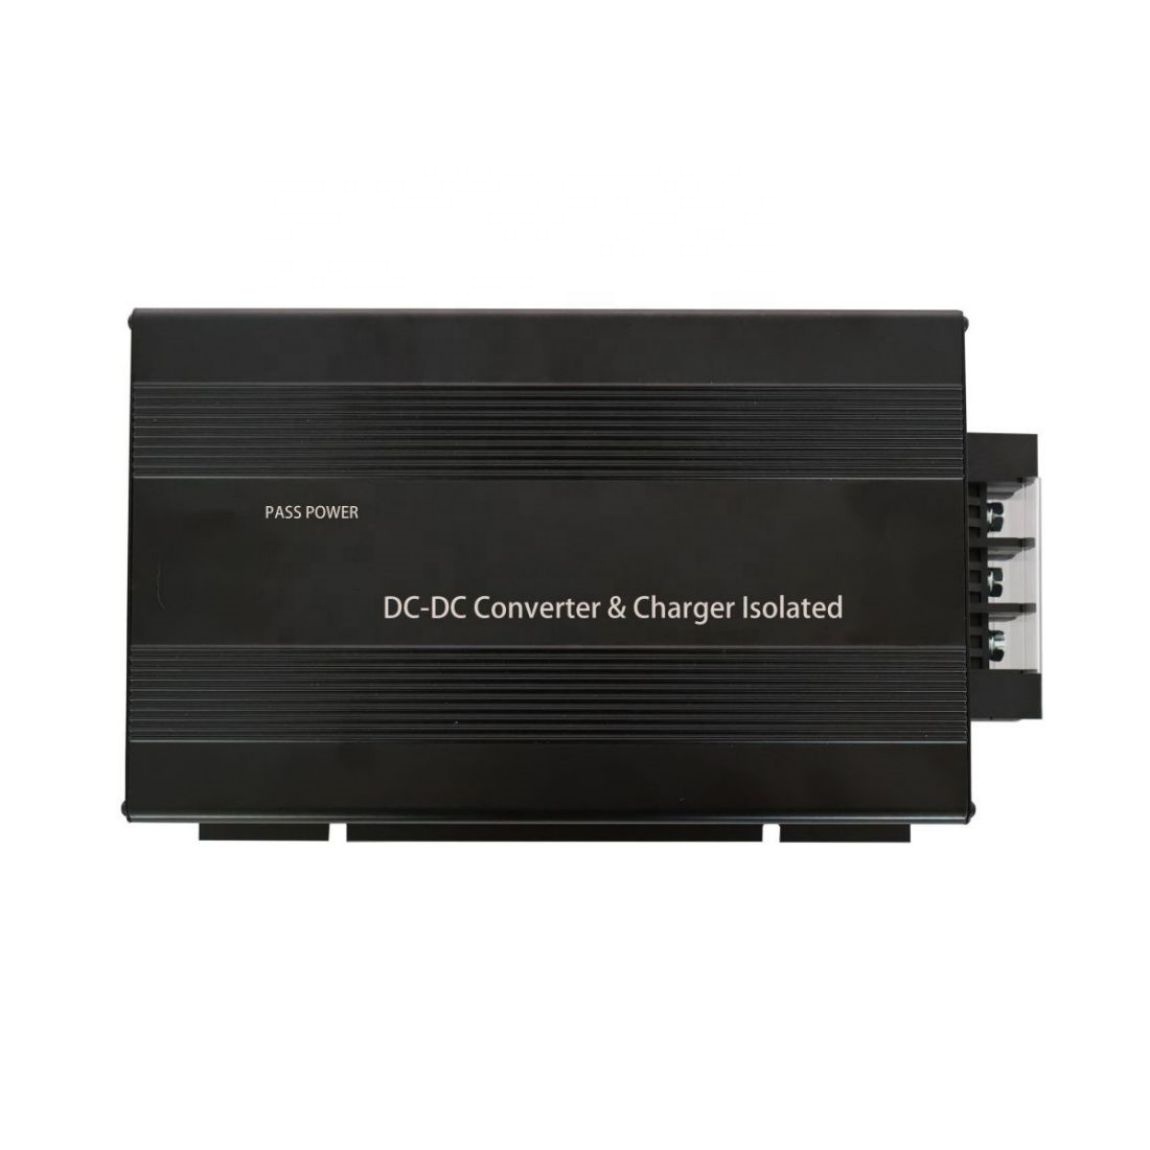 24V to 48V DC-DC converter and charger isolator step up battery voltage for two battery translate system